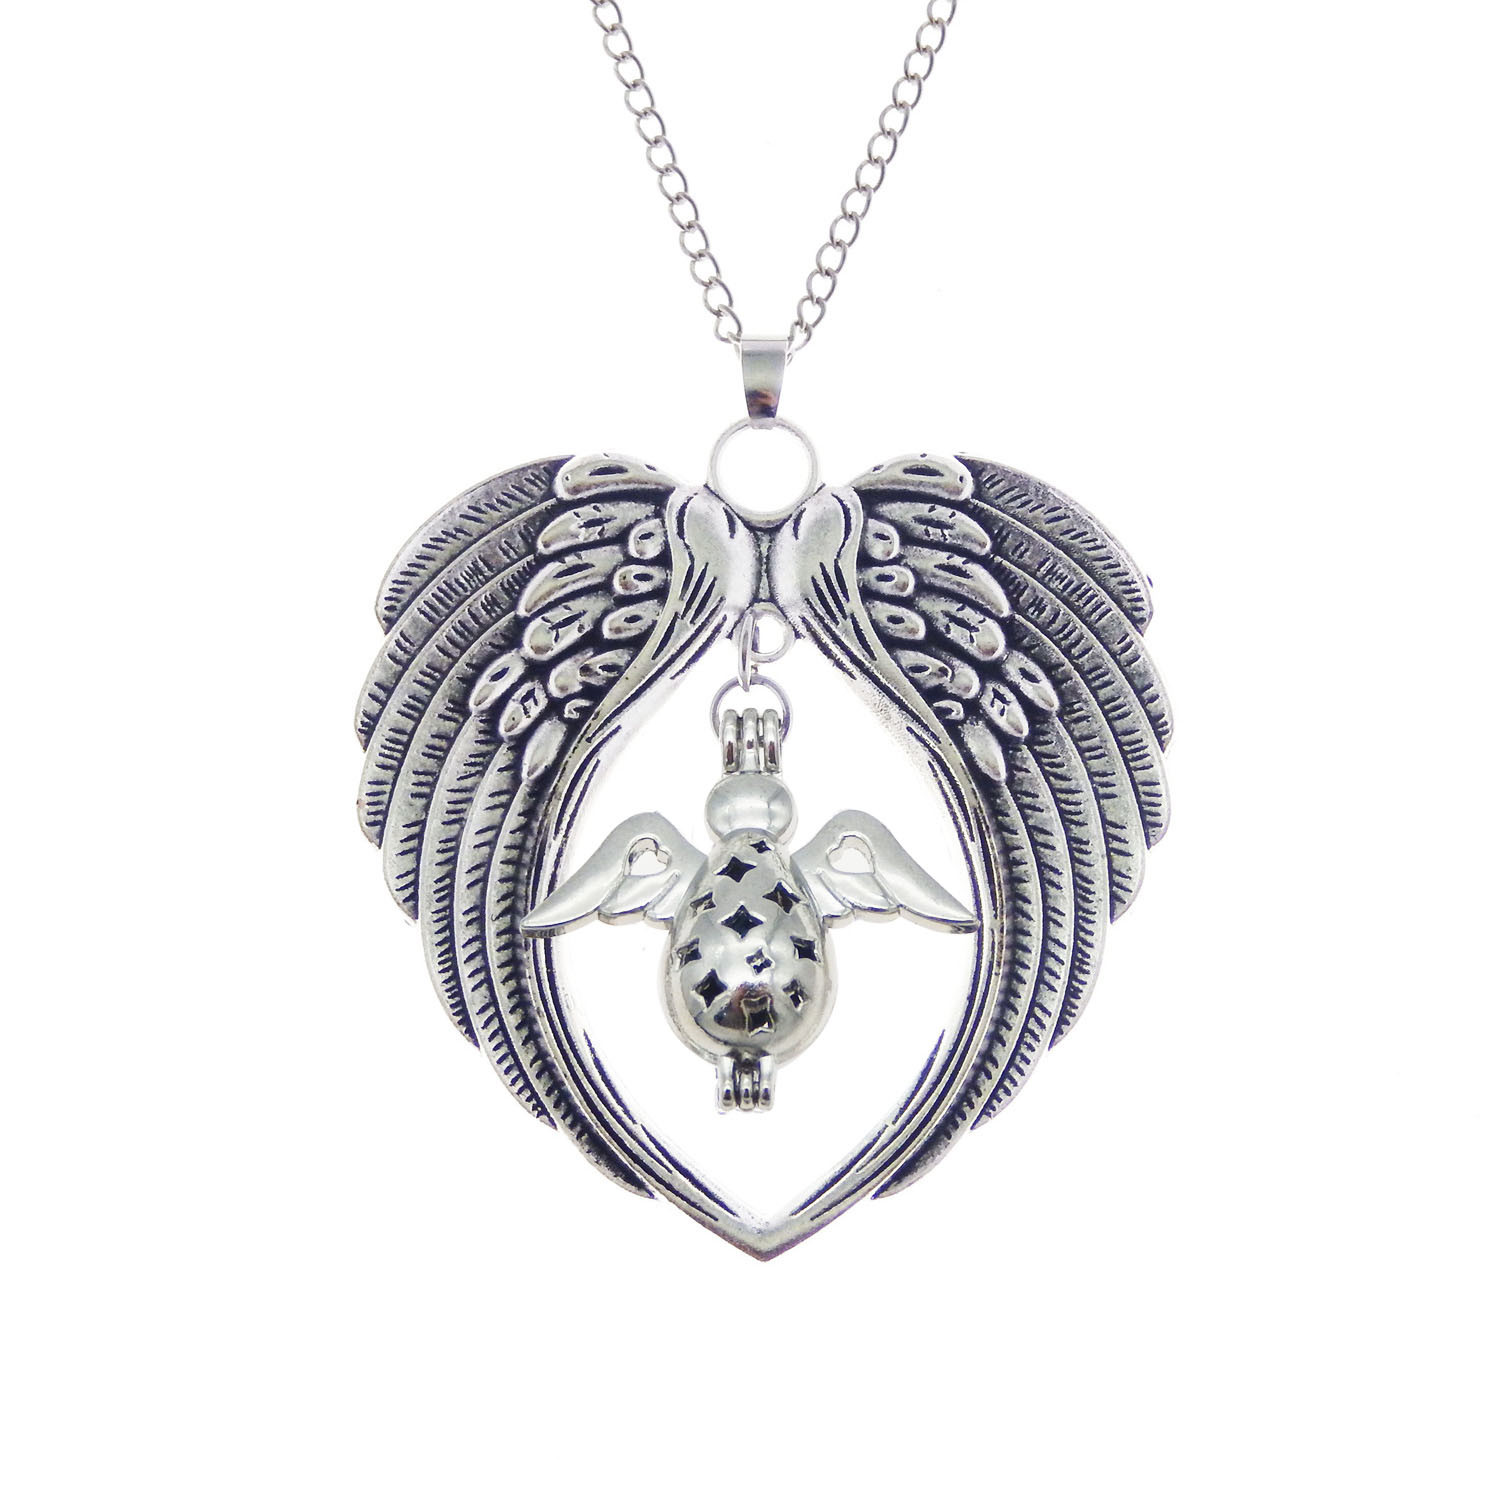 1 x Silver Alloy Winged Heart Dangle Pendant Angel Locket Necklace Jewelry Gifts